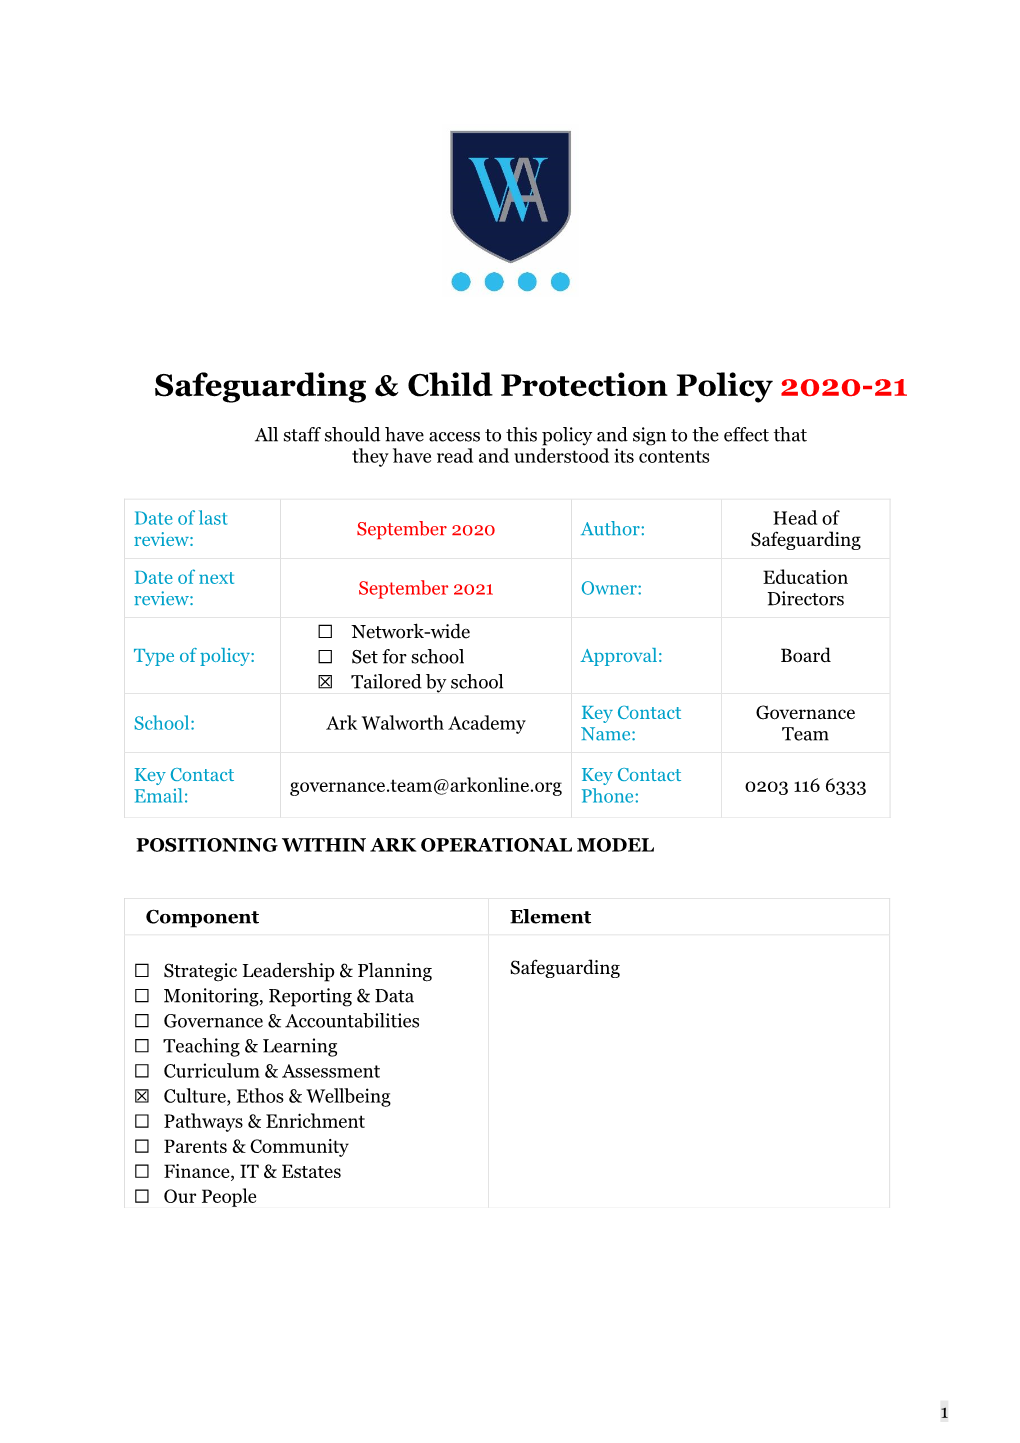 Safeguarding & Child Protection Policy 2020-21